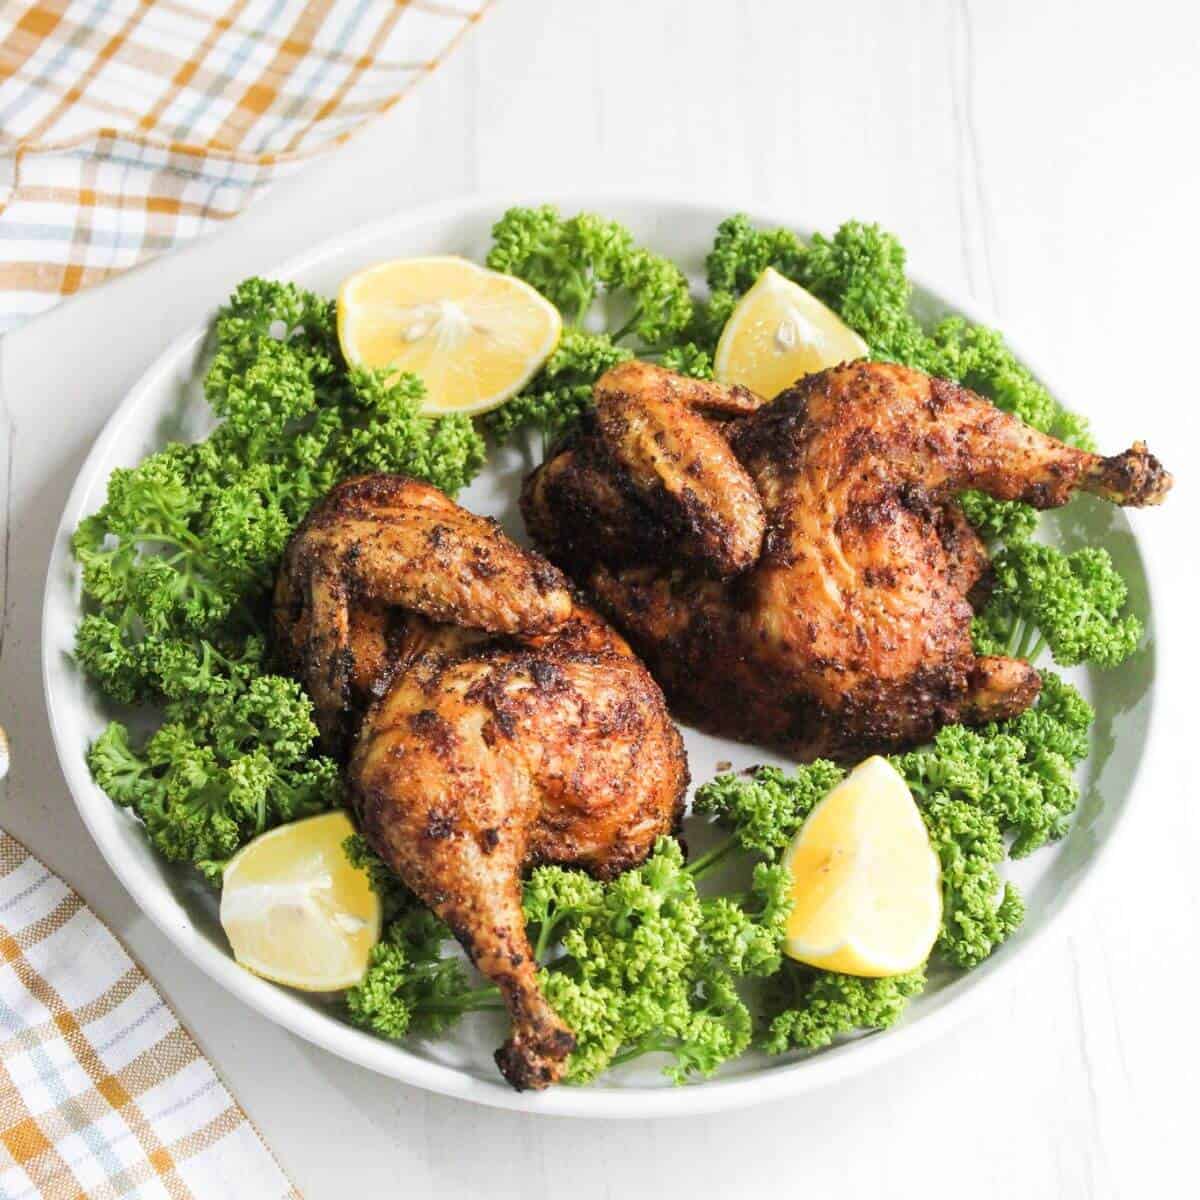 Cornish hen halves on plate with parsley and lemon wedges.